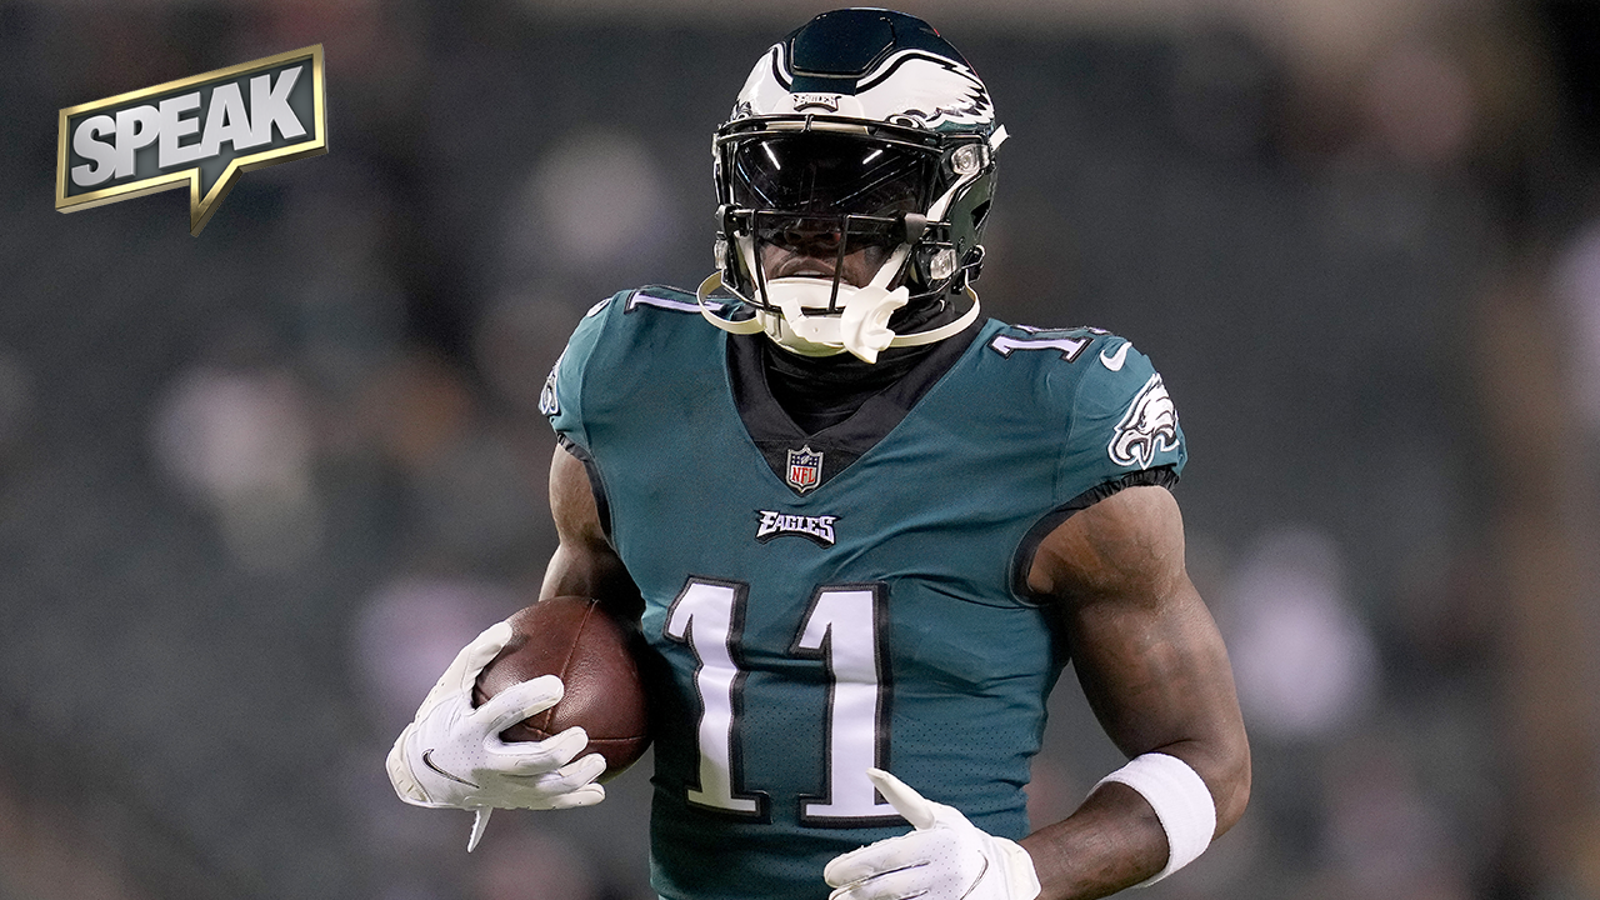 Eagles WR A.J. Brown on loss: "Now we're going to wake up"